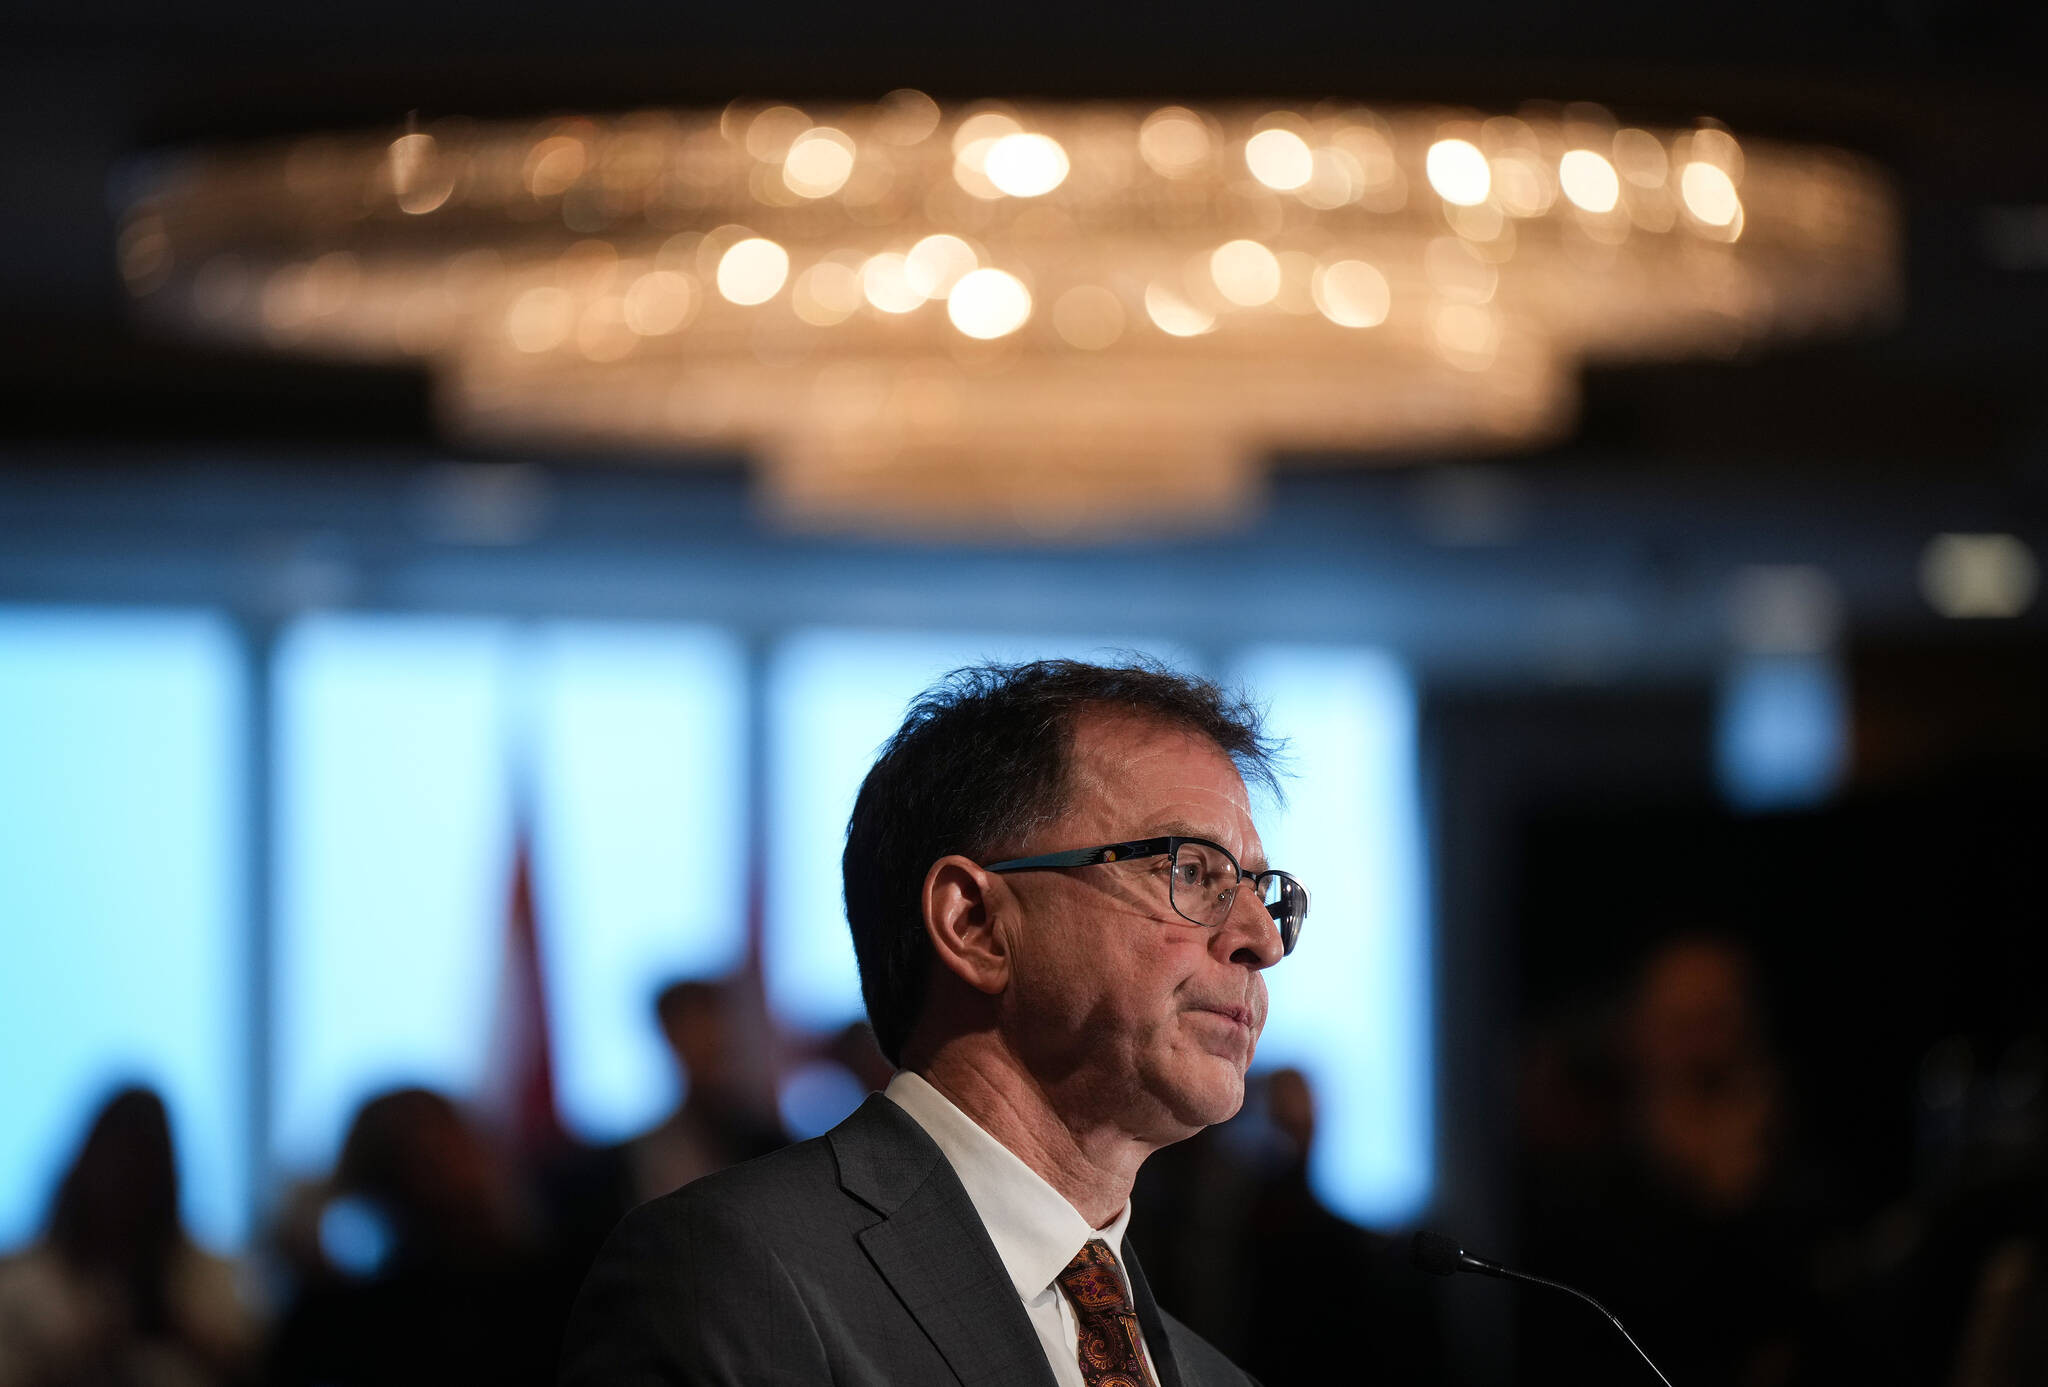 B.C. Health Minister Adrian Dix pauses during a news conference with his provincial counterparts after the second of two days of meetings, in Vancouver, on Tuesday, November 8, 2022. THE CANADIAN PRESS/Darryl Dyck